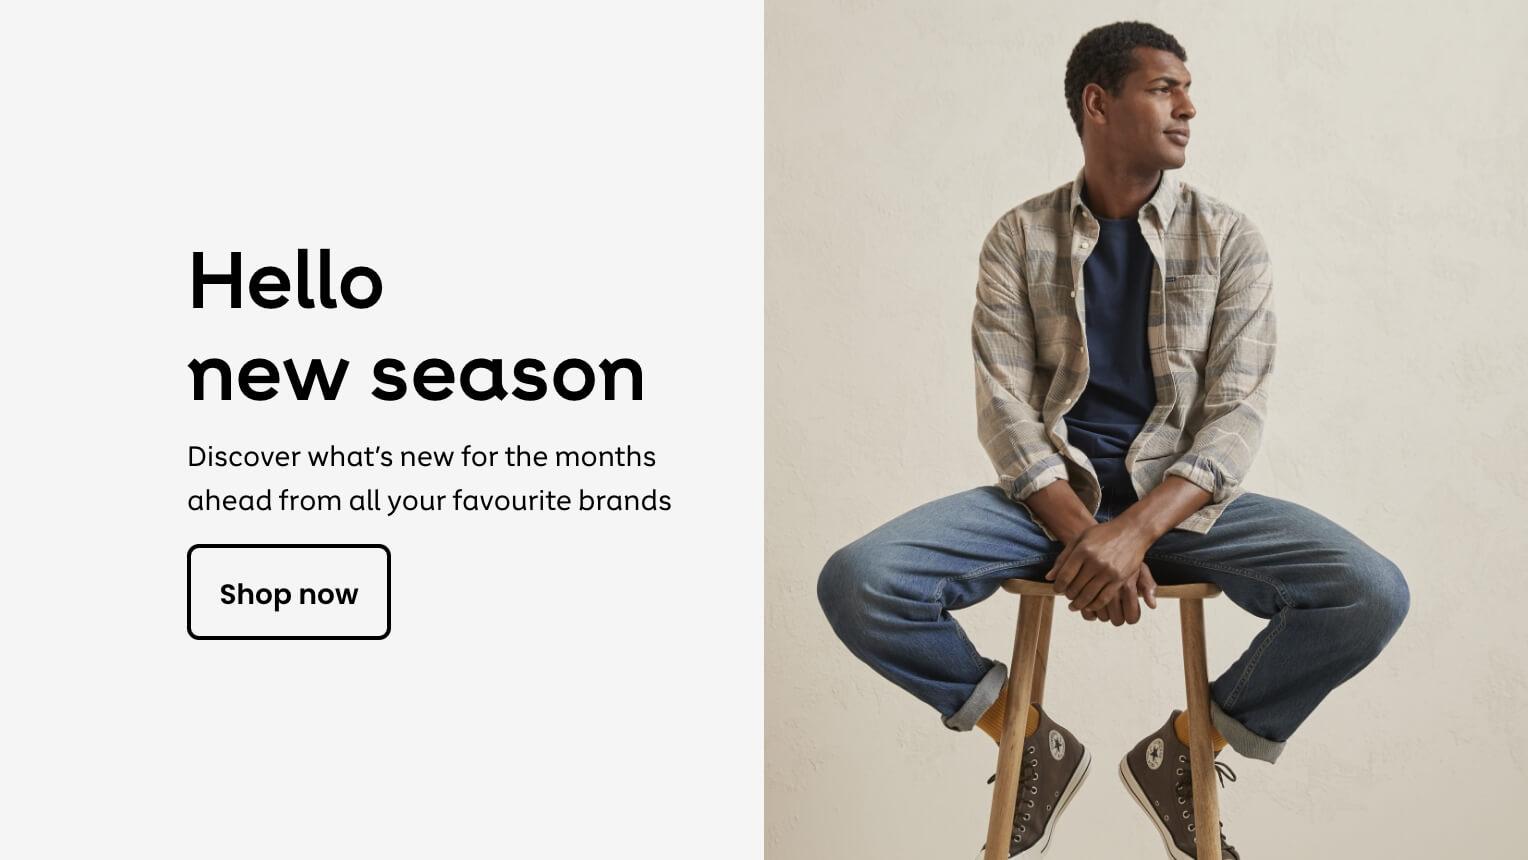 Hello new season.
Discover what's new
for the months ahead
from all your favourite
brands.
Shop now